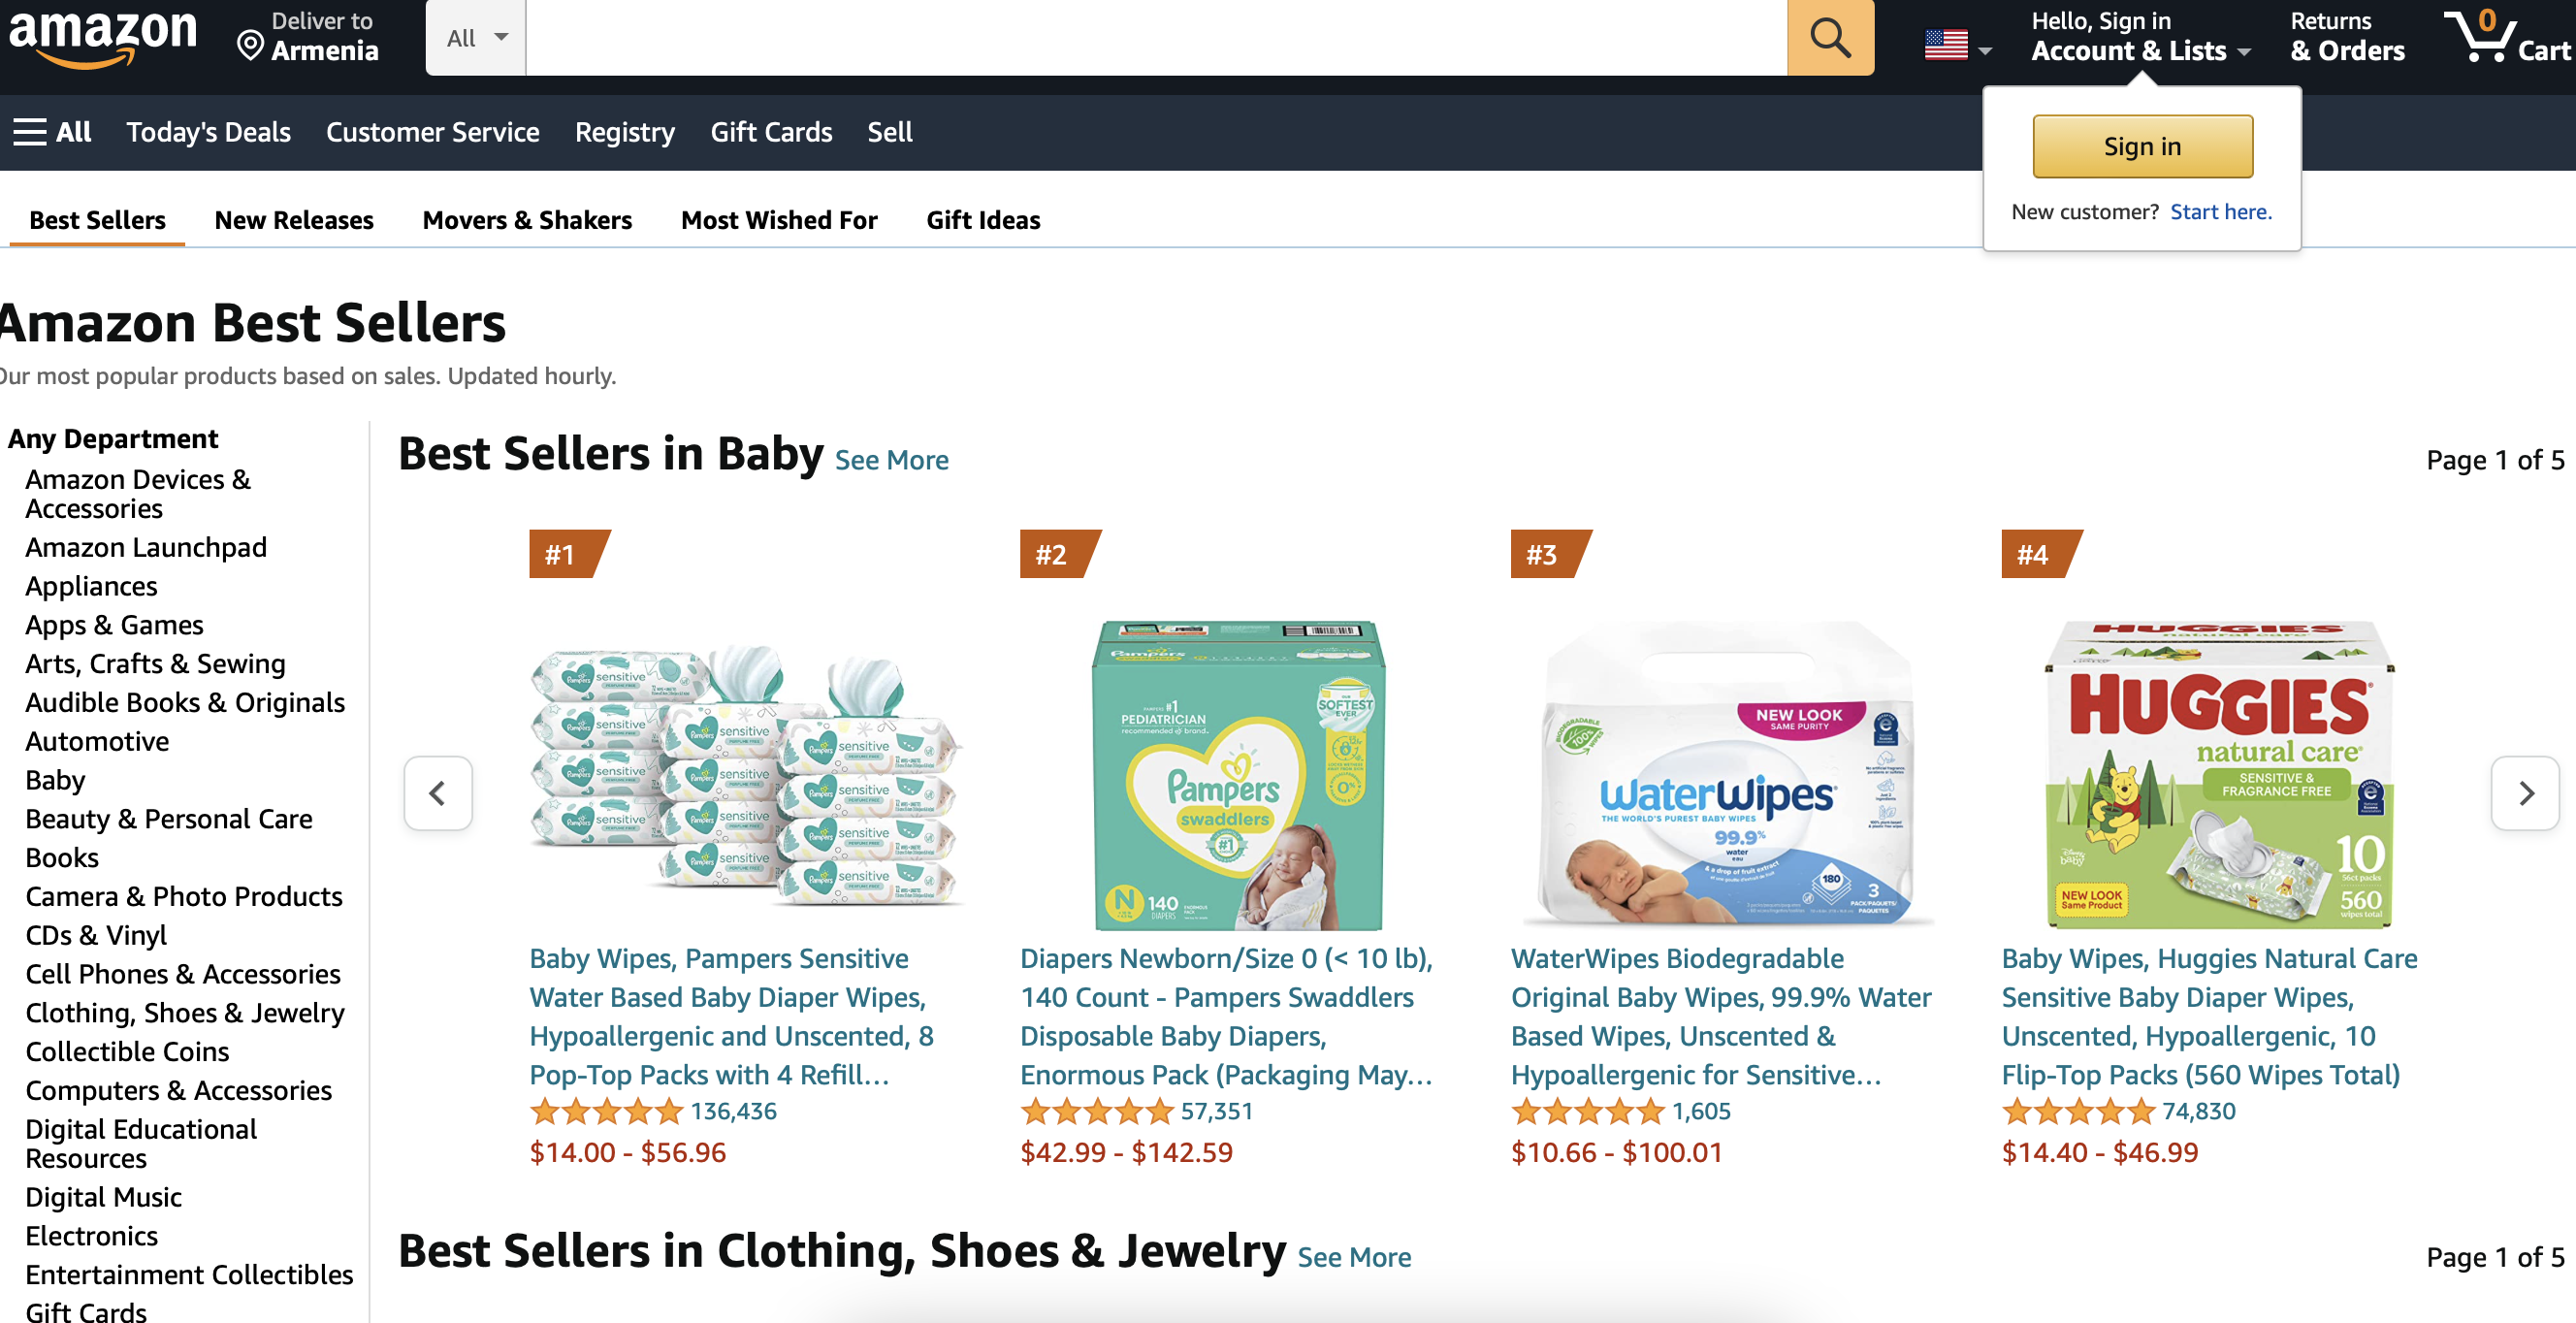 Top 10 selling products and categories on Amazon in 2022